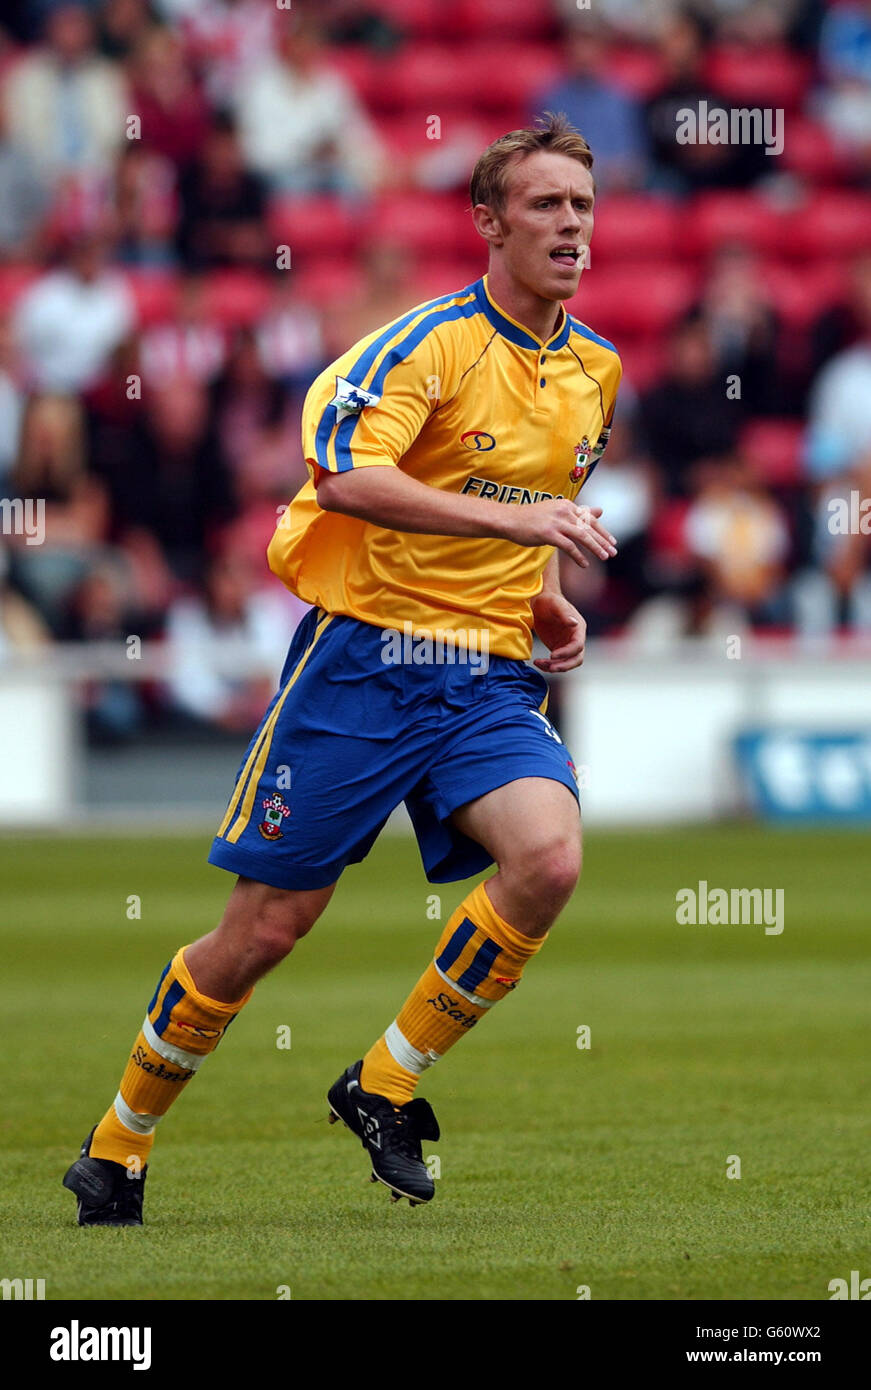 Brett Ormerod in action during the pre-season friendly game between Southampton and FC Utrecht at St Mary's stadium, Southampton. Stock Photo